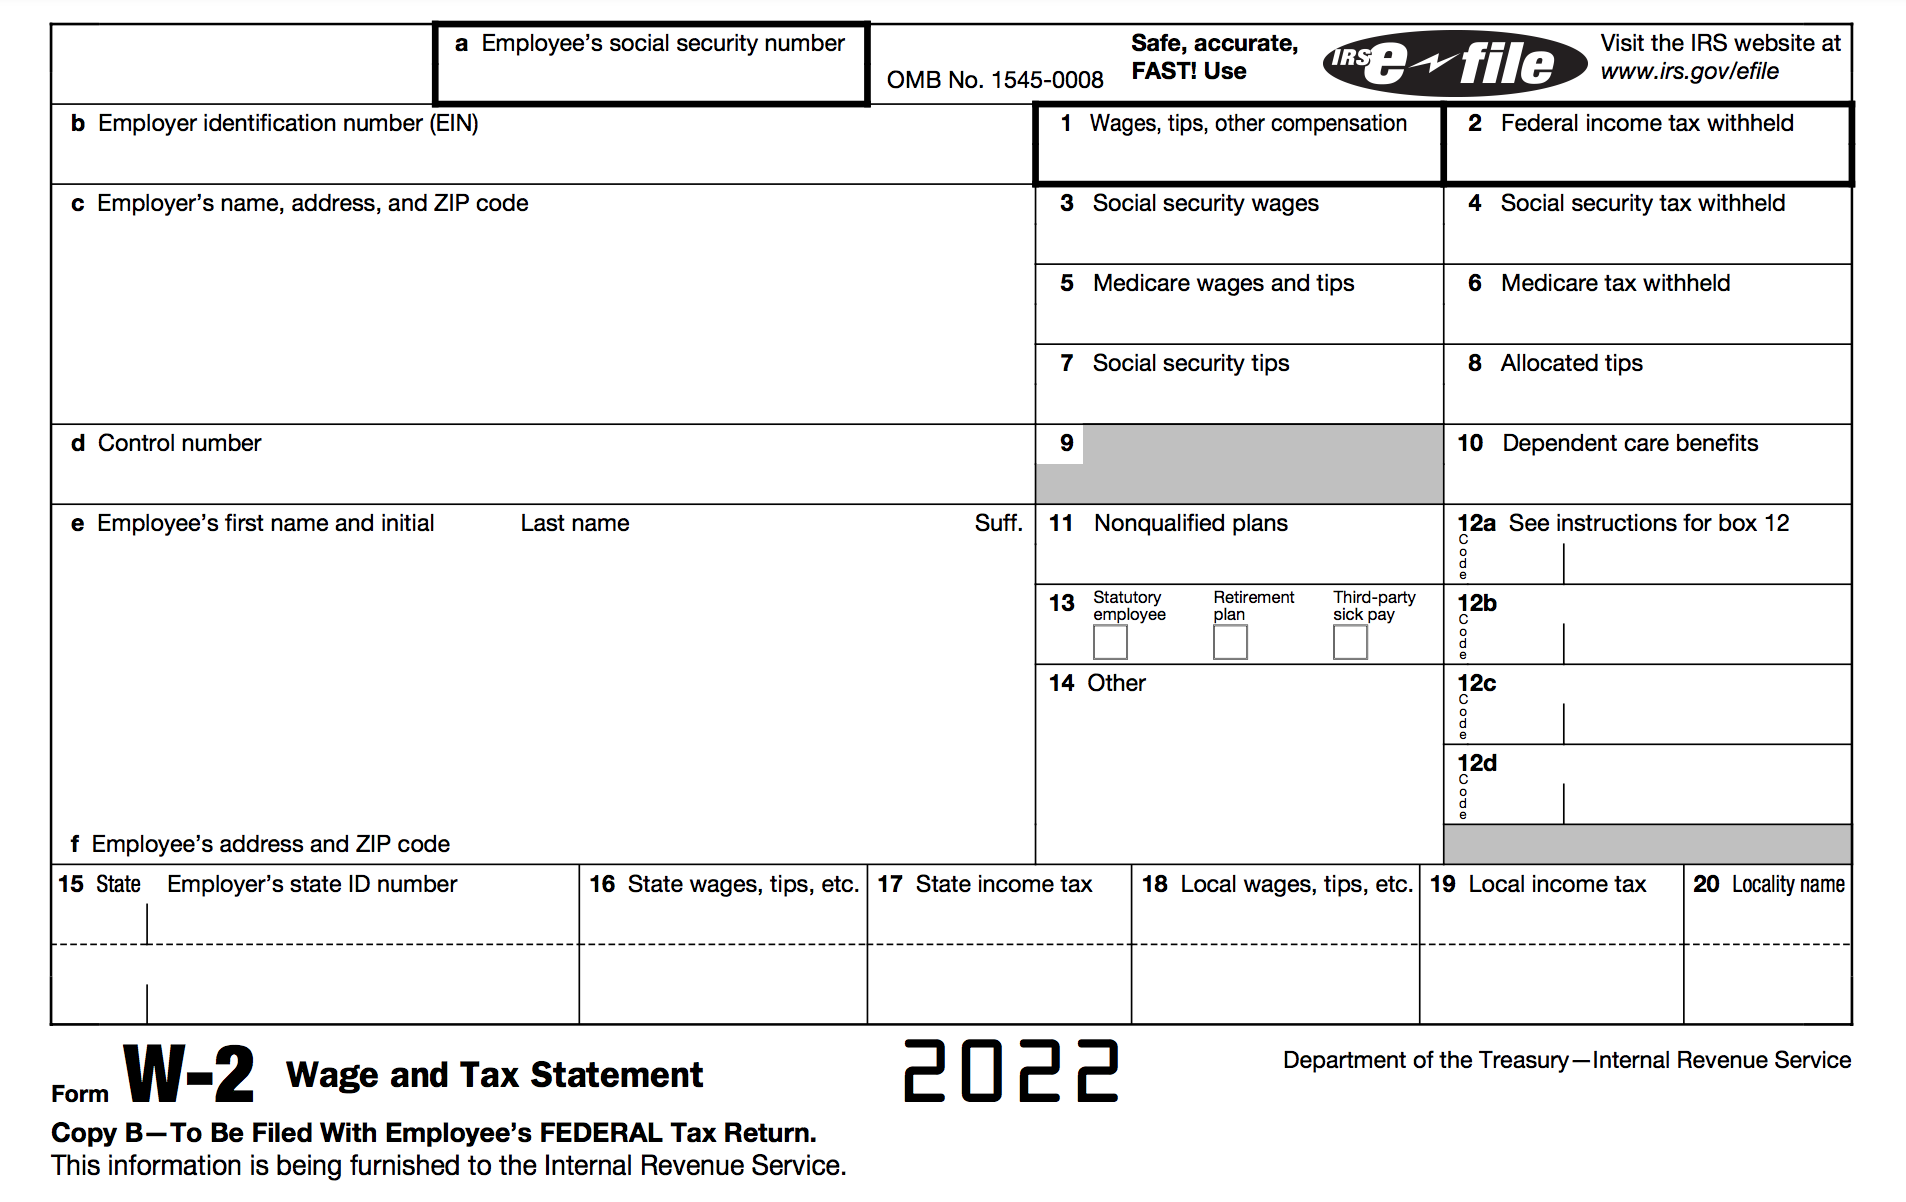 How To Fill Out A W-2 Tax Form | Smartasset with regard to Can I Handwrite W2 Forms